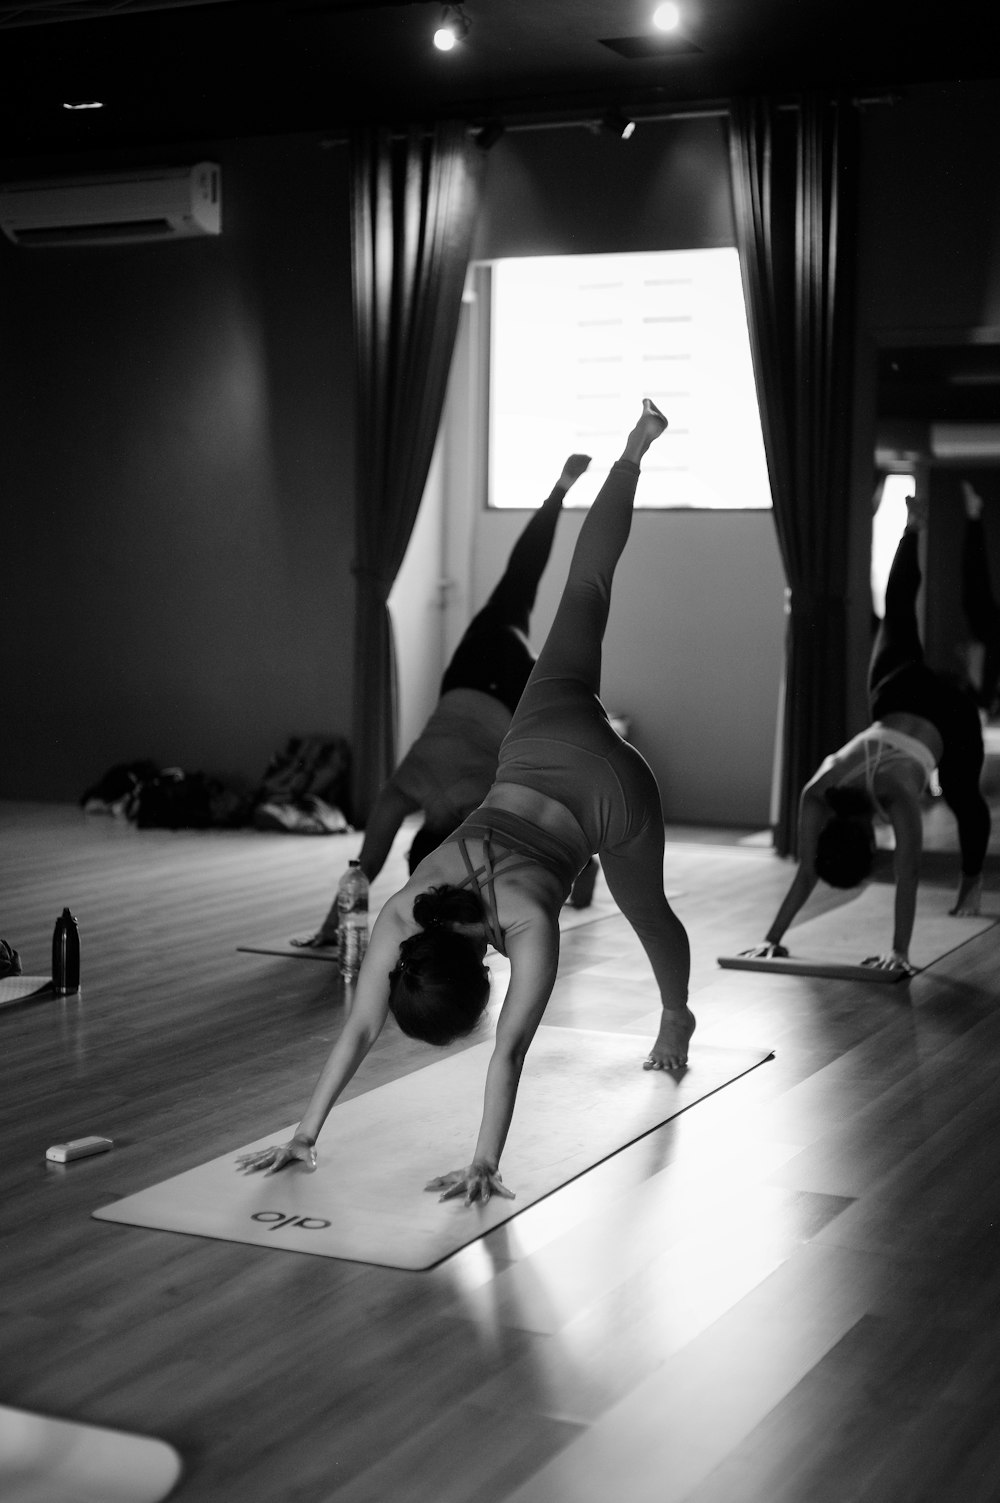 a group of people doing yoga in a room